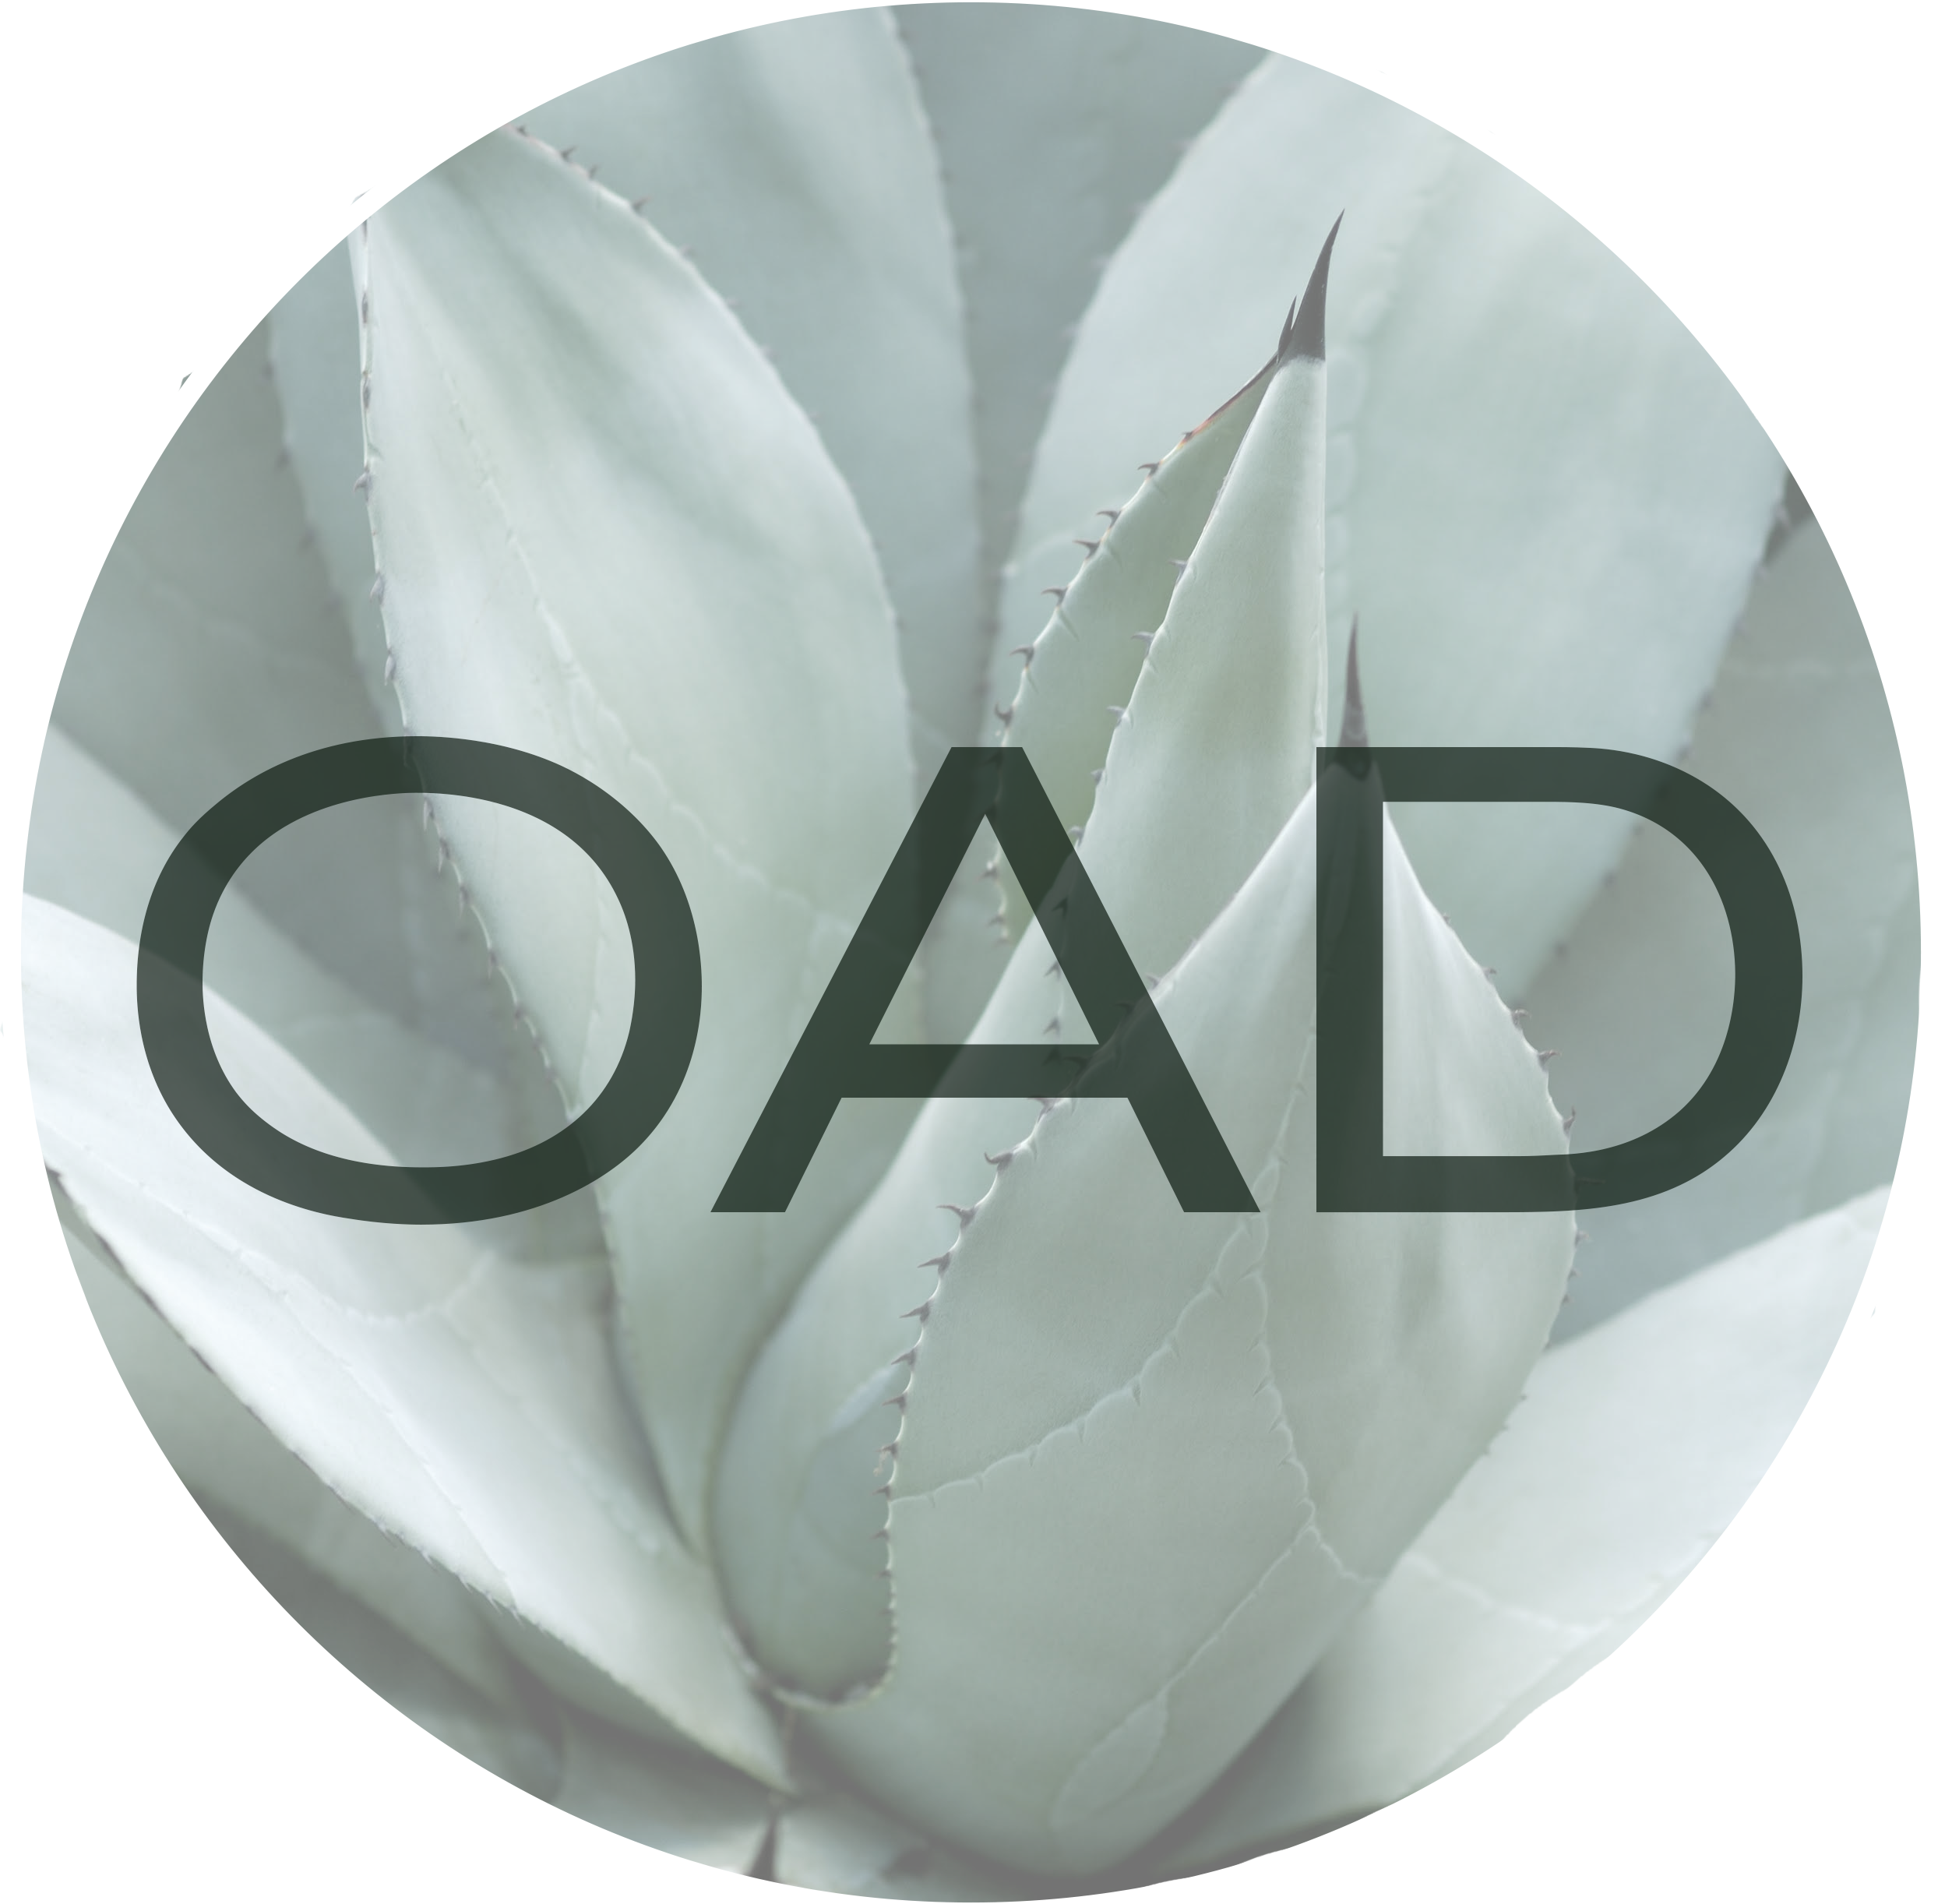 OAD Logo - Rania Odeh Affan.png